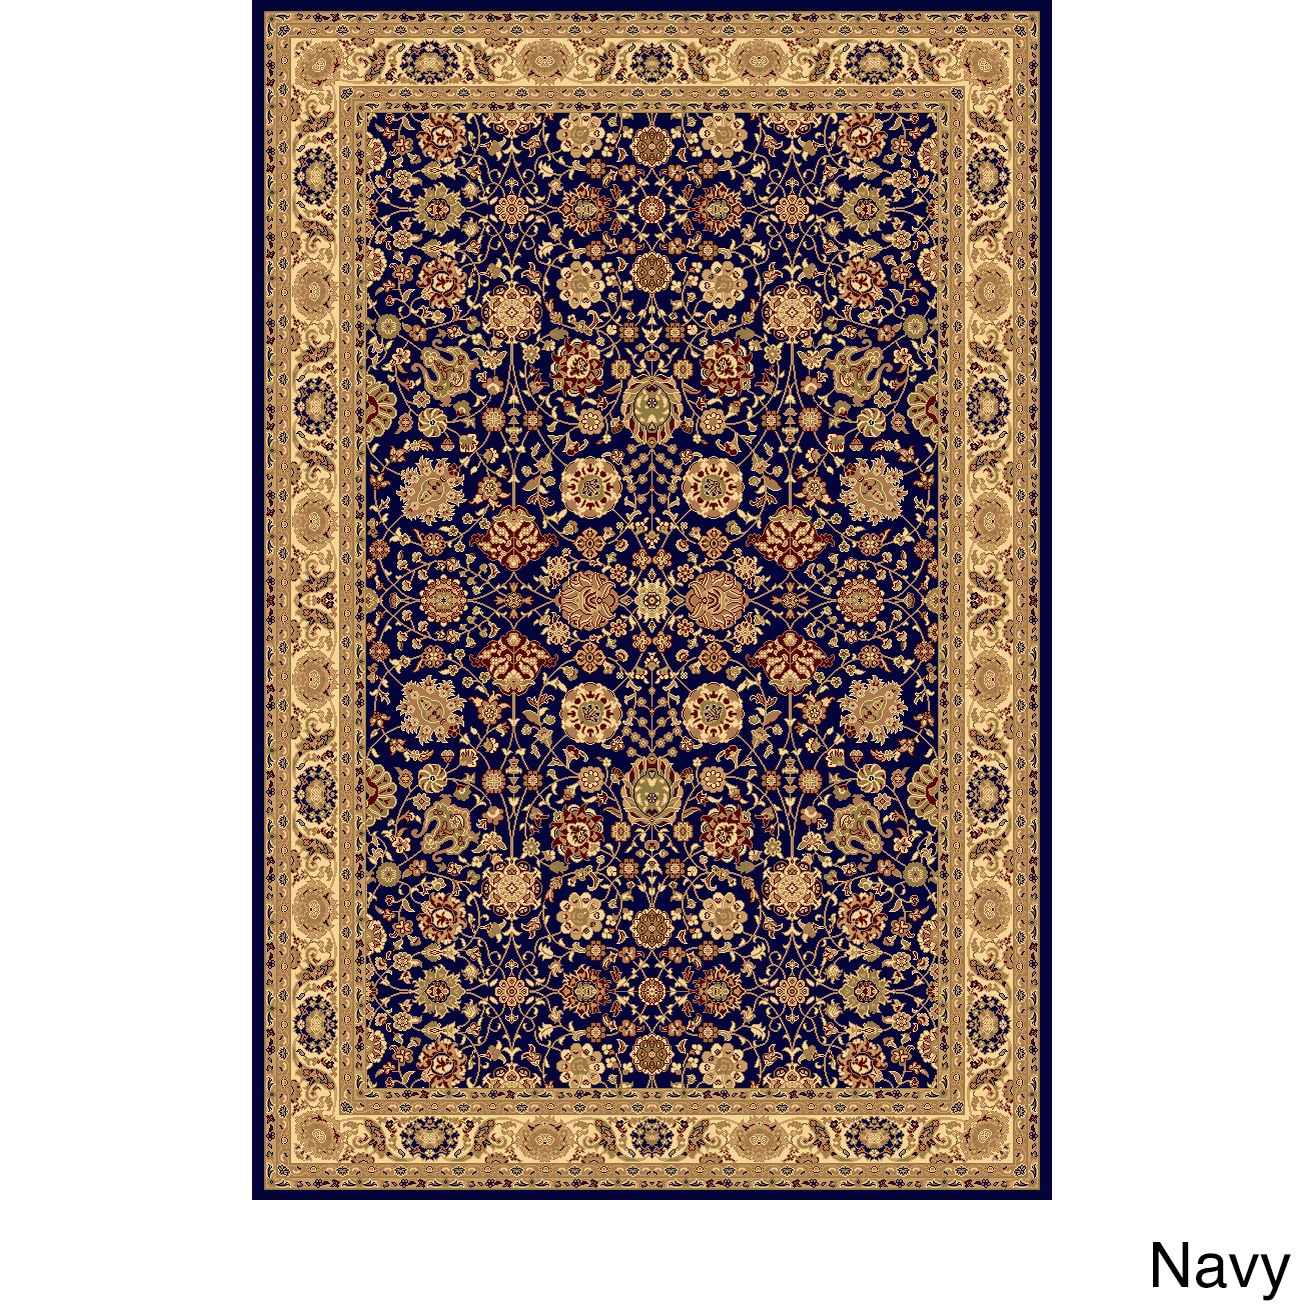 Rugs America Corp New Vision Tabriz Area Rug (710 X 1010) Navy Size 8 x 10